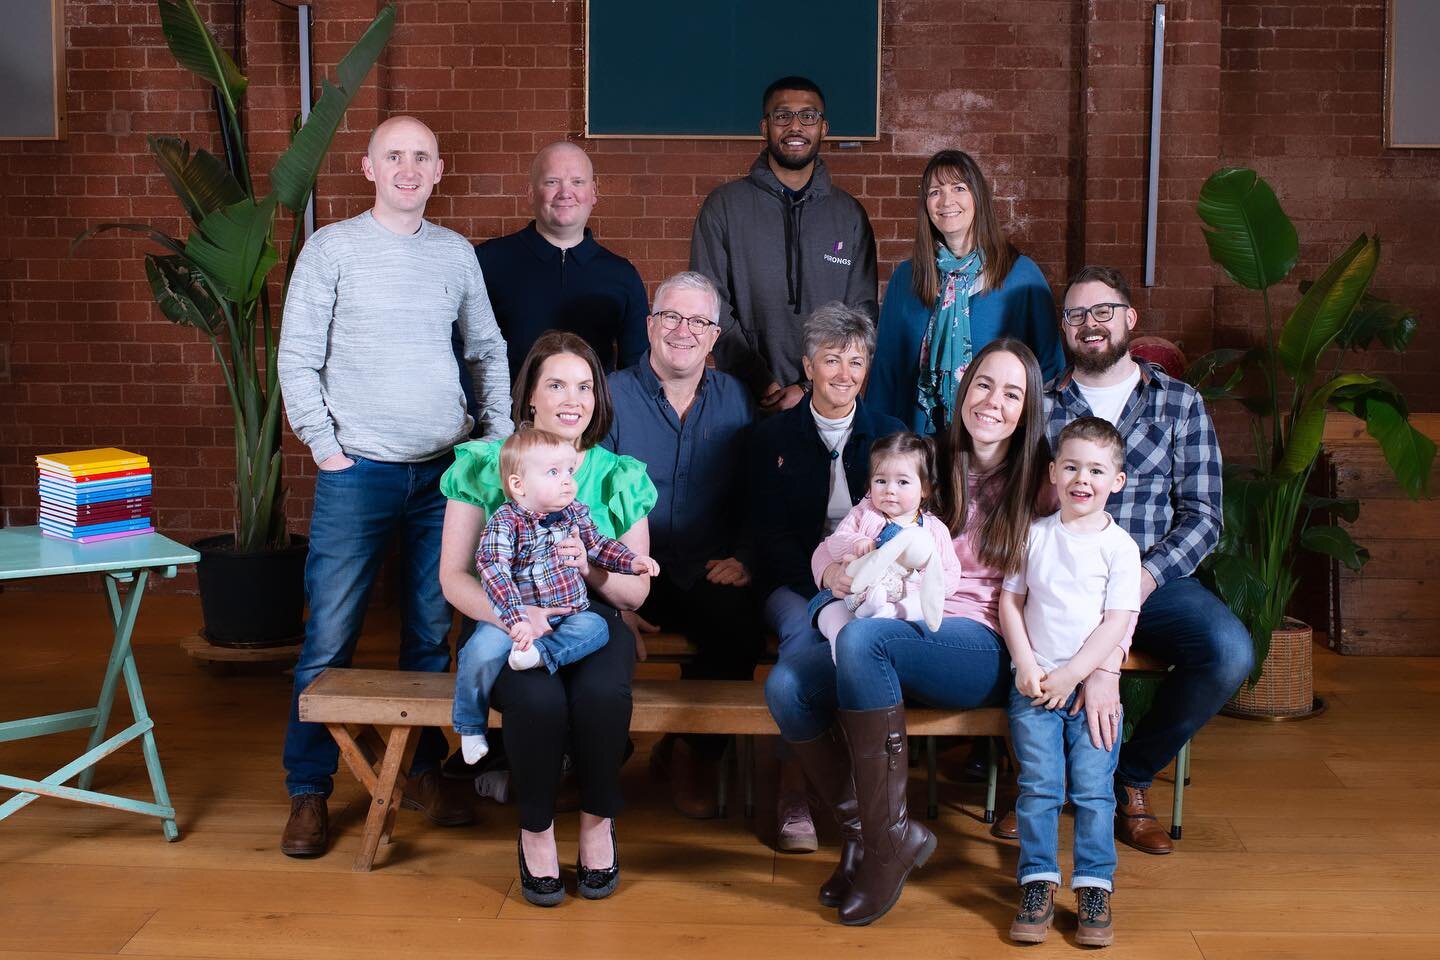 As winter closes in, you well-organised folk might be thinking of gifts&hellip;
As I do every year, I like to give a shout out to clients who create wonderful things.
Here is the team behind, the family run business, Pirongs. 
They produce lovely, co